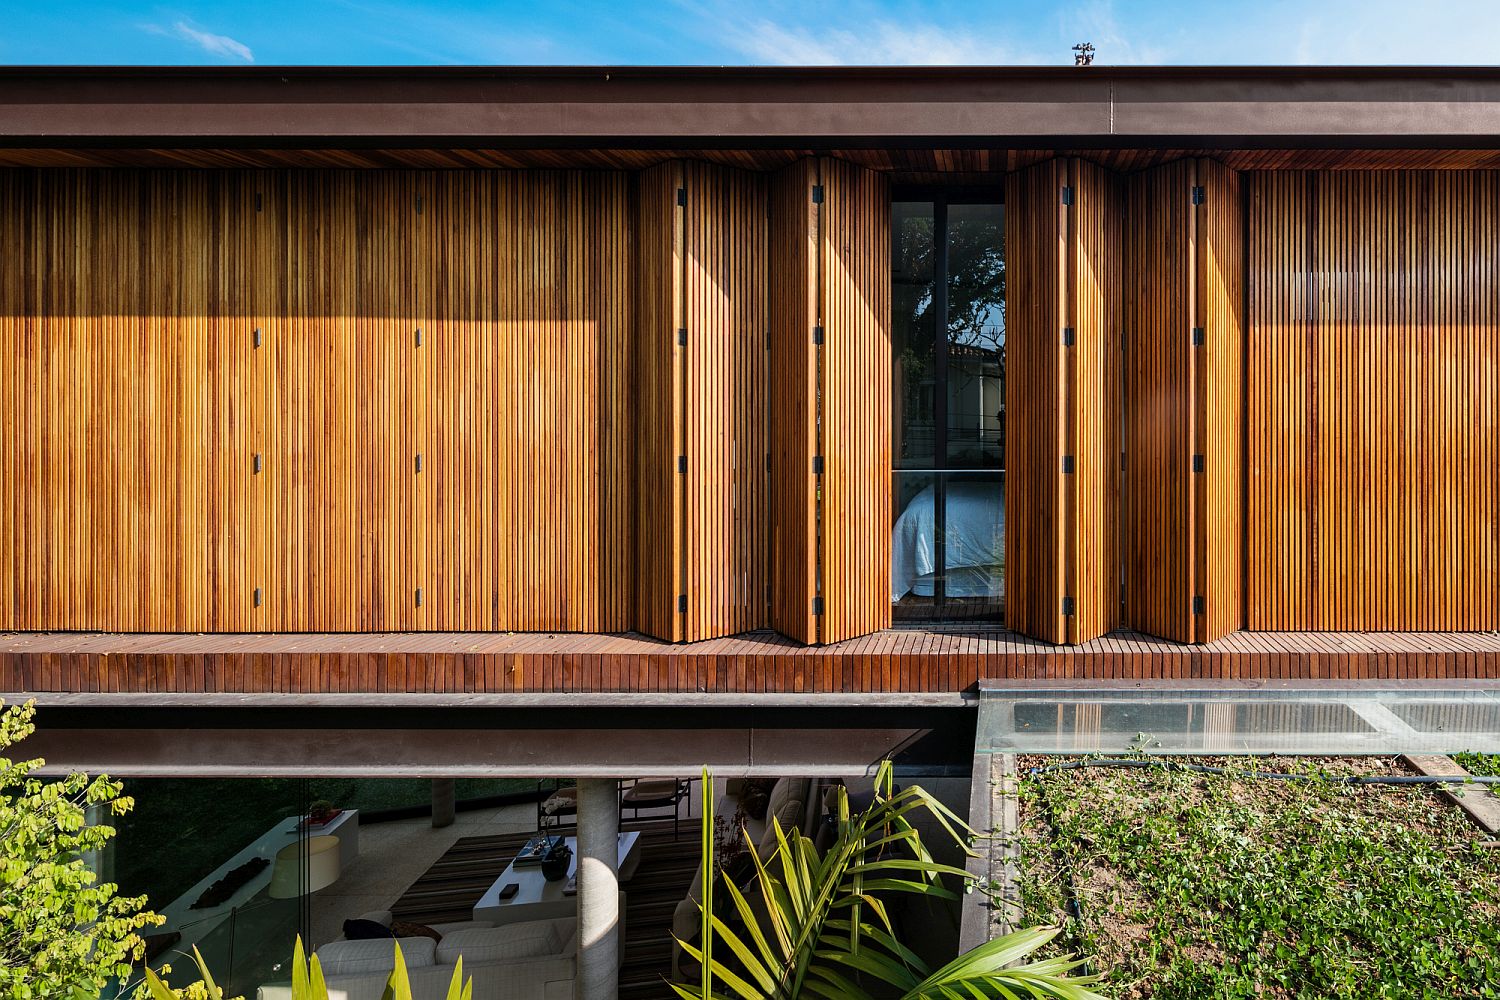 Folding wooden doors allow the homeowners to shift between privacy and lovely views